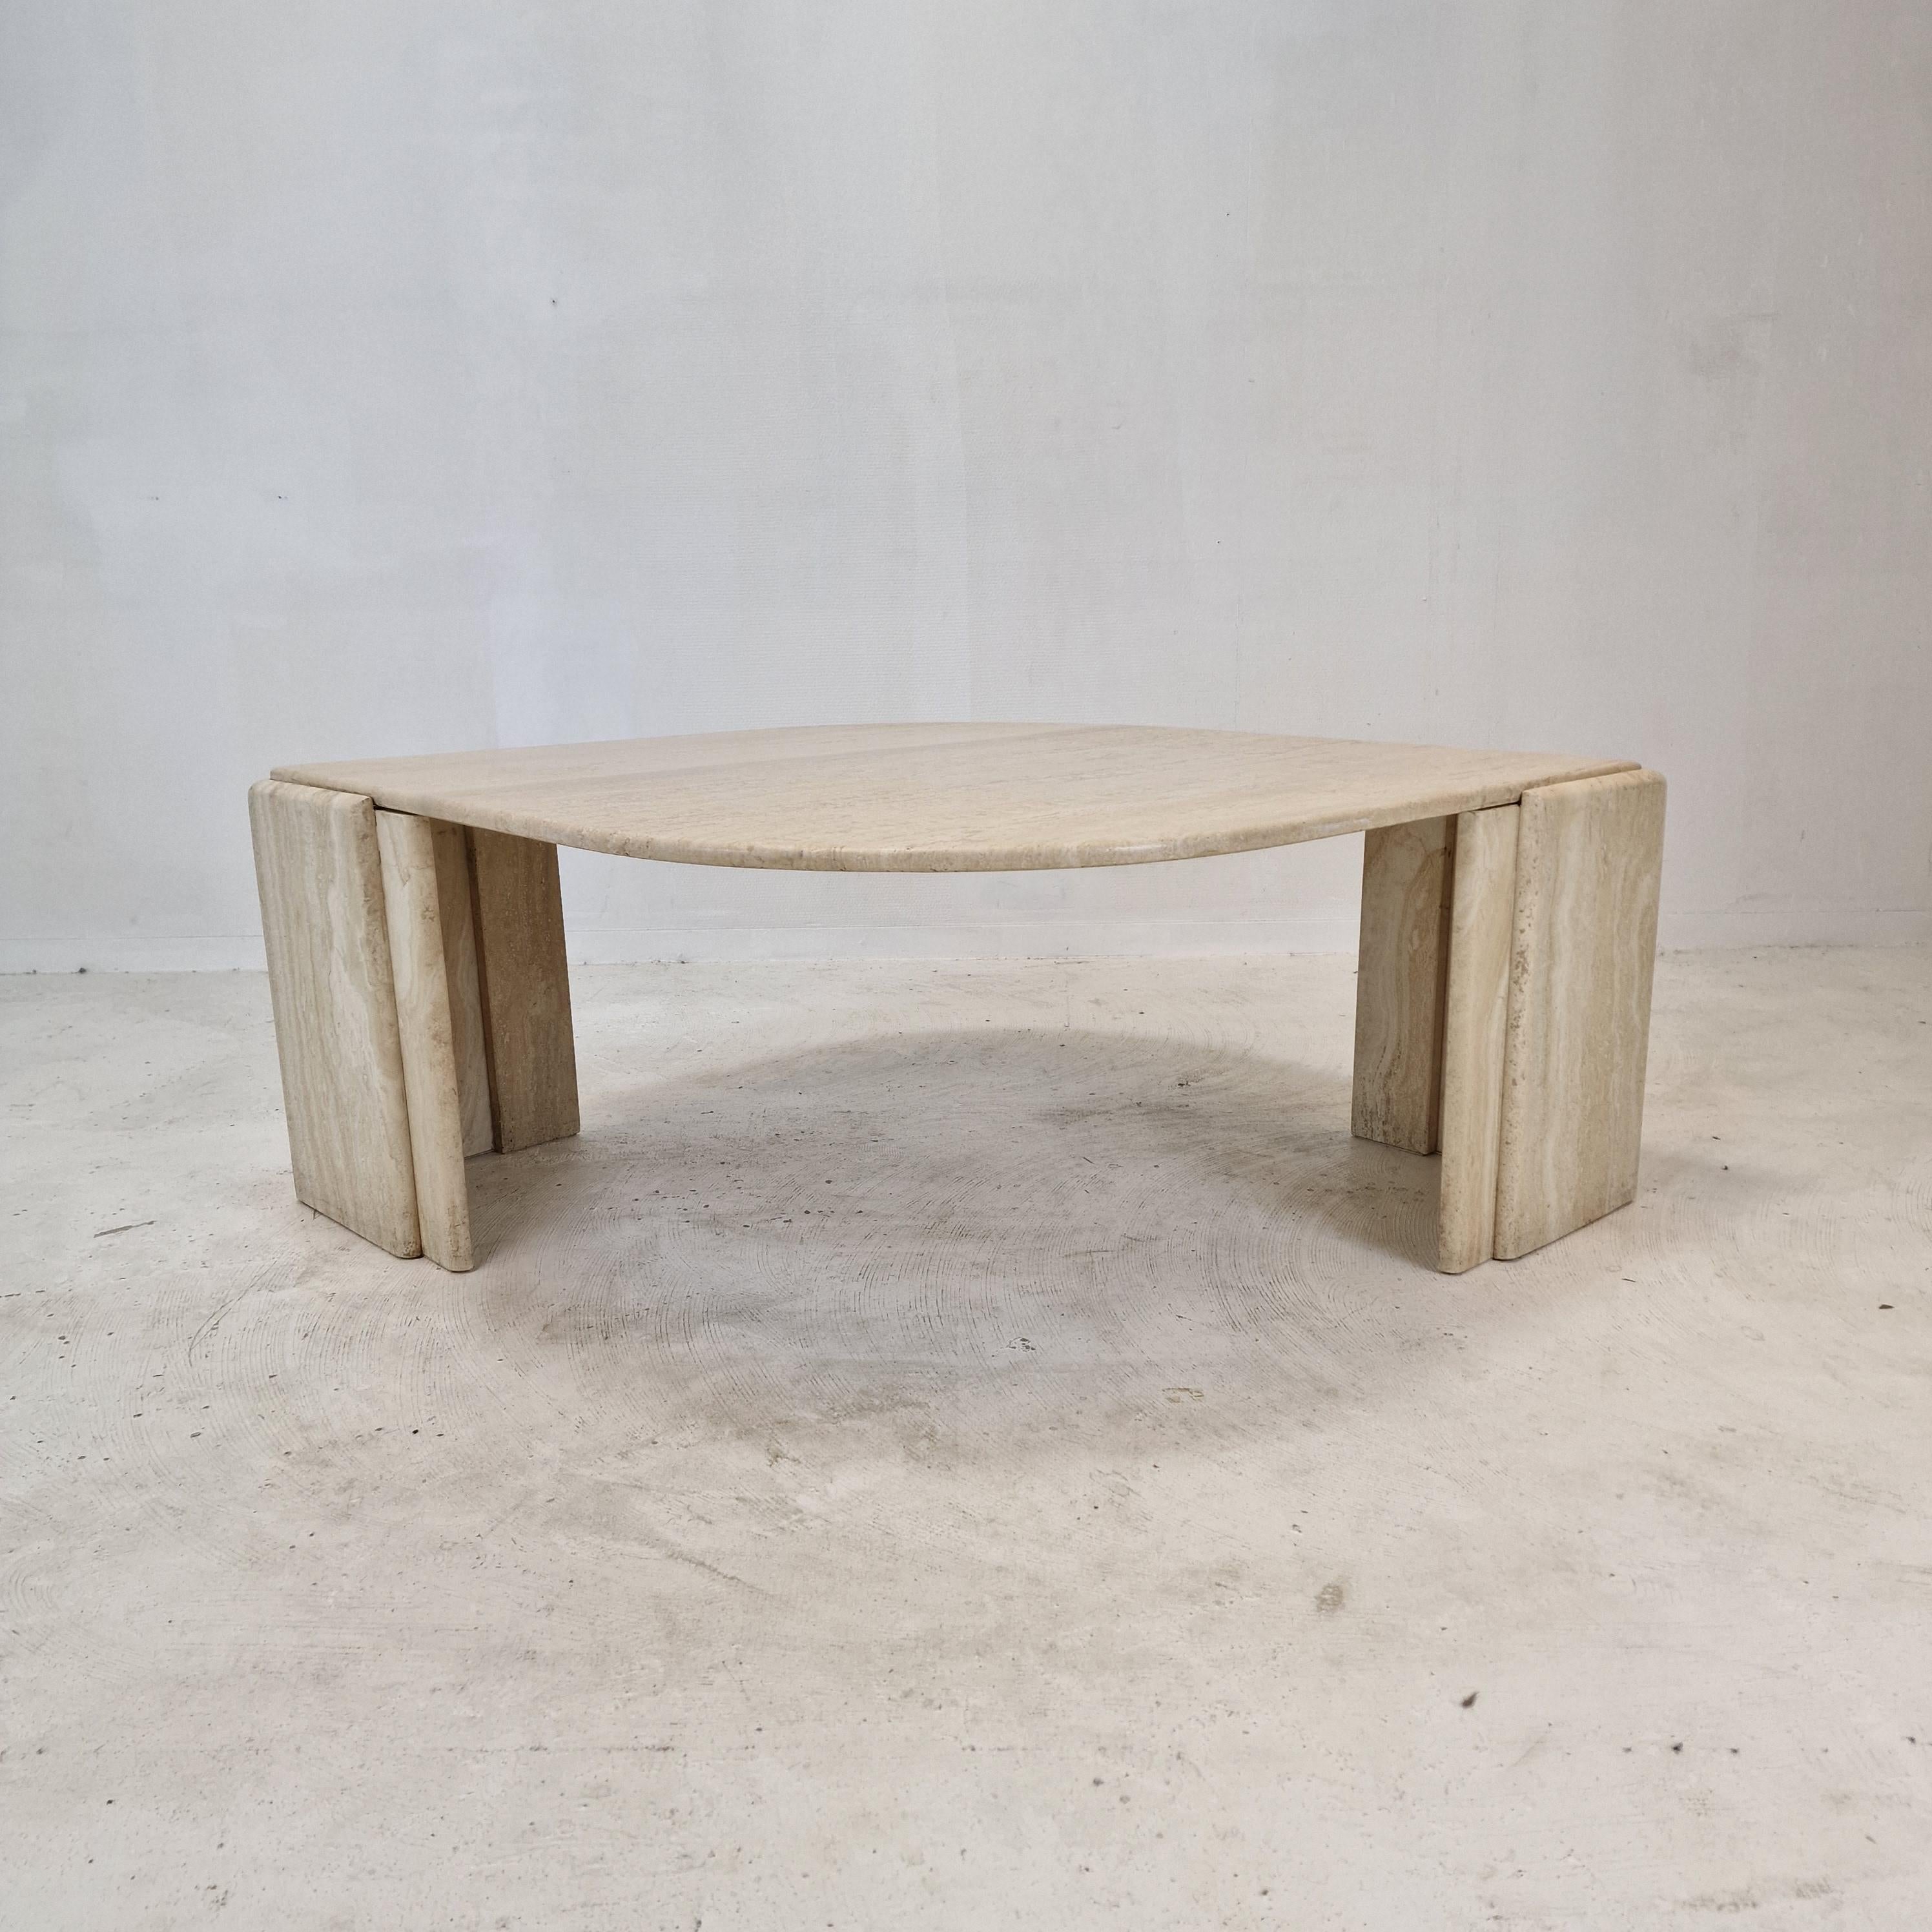 Hand-Crafted Italian Travertine Coffee Table, 1980's For Sale